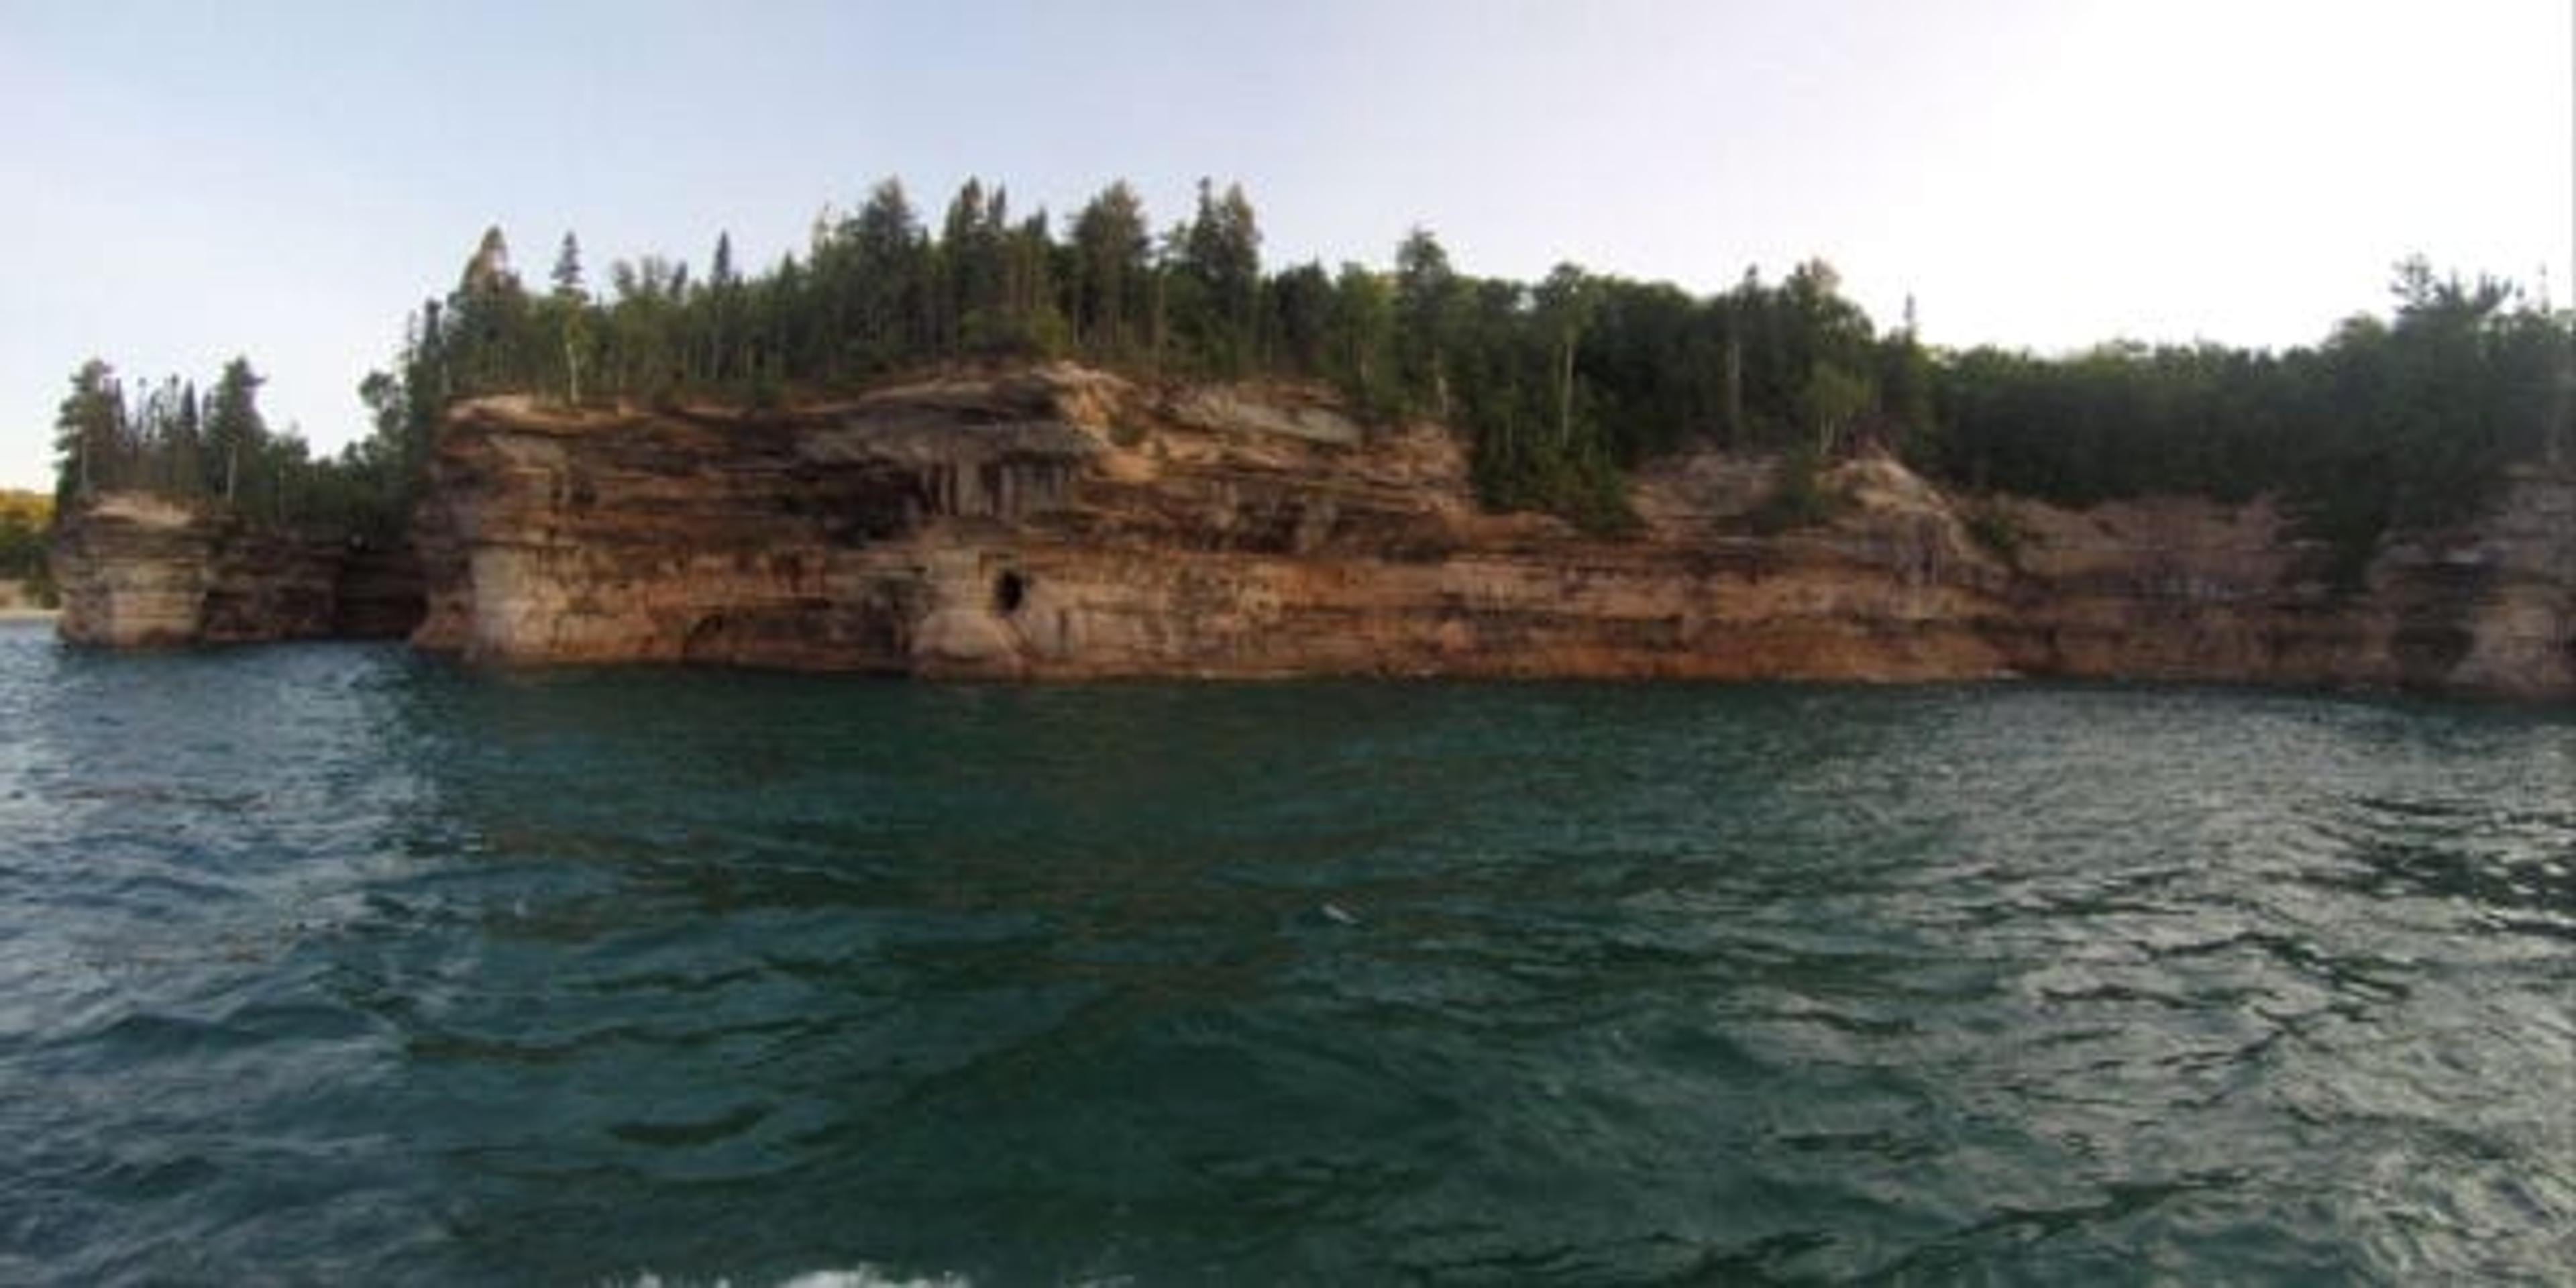 View of Pictured Rocks from the water